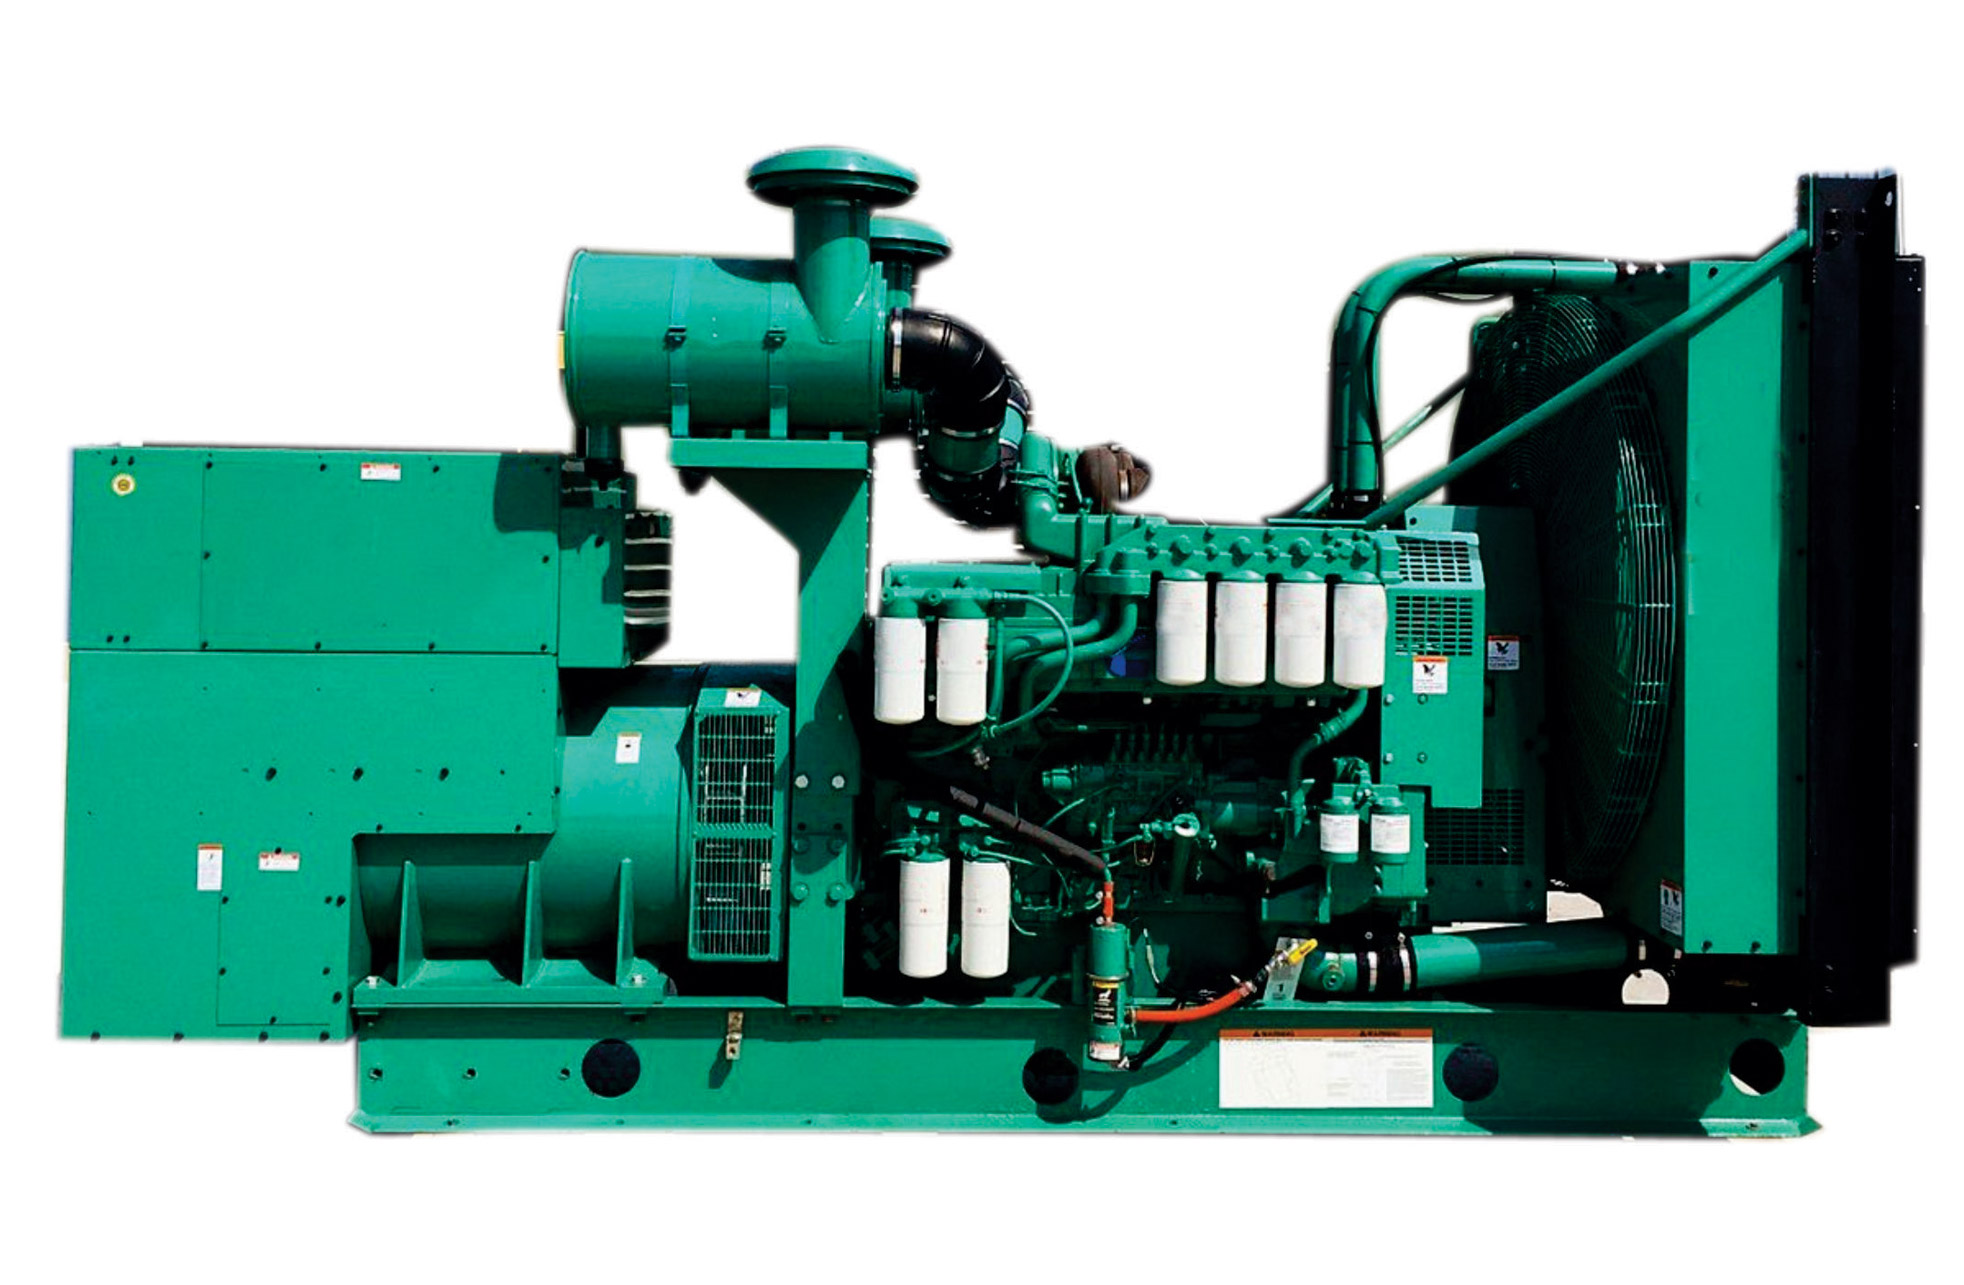 generator spare parts suppliers and retailers in ludhiana, punjab and india, retailers of diesel genset spare parts ludhiana, punjab and india